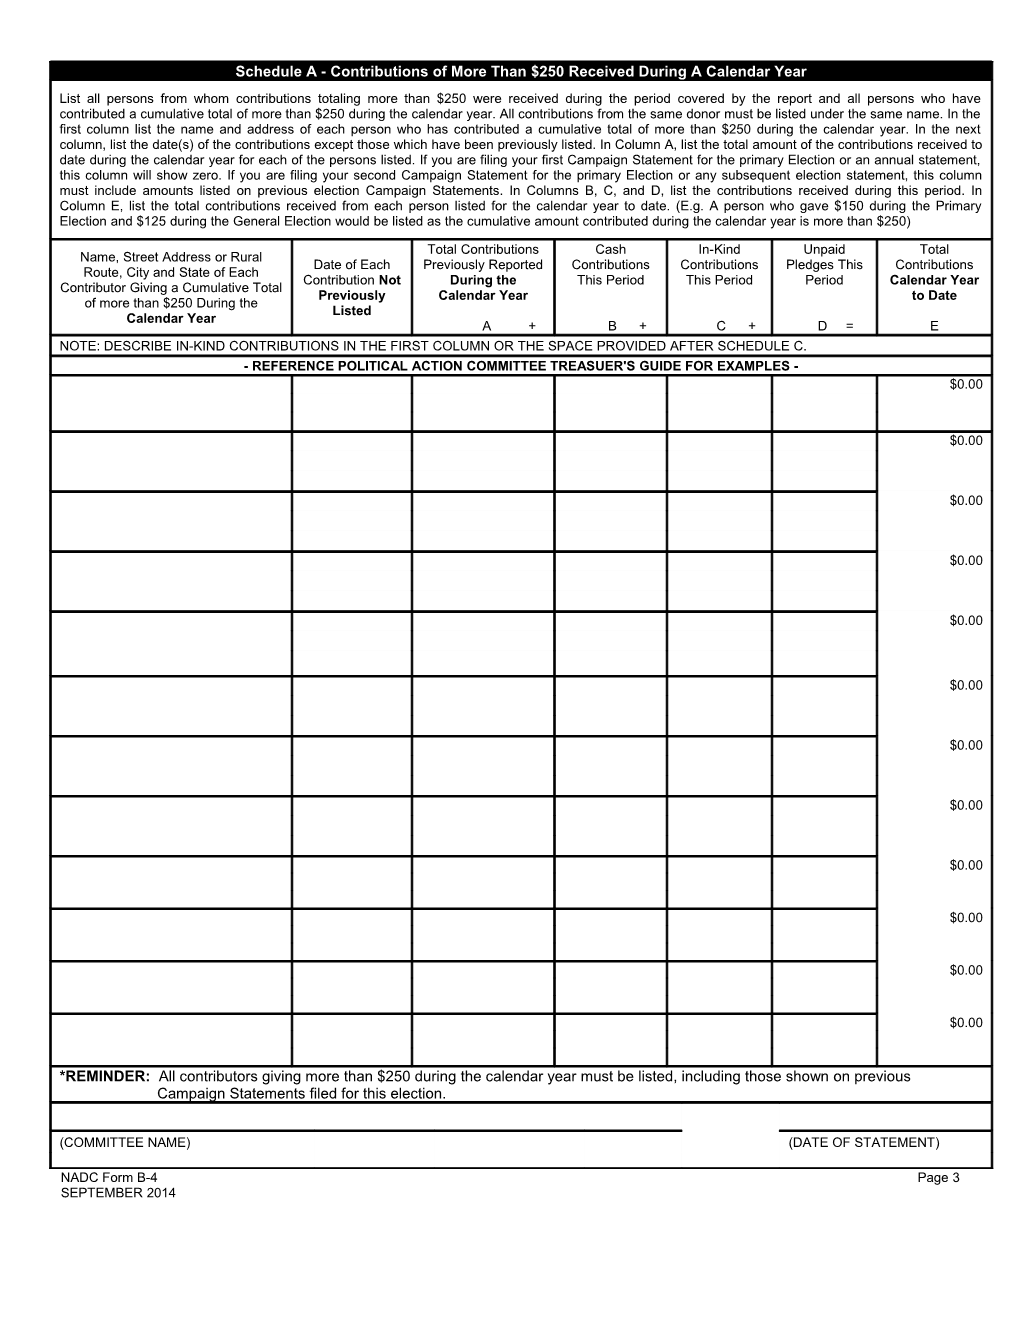 NADC Form B-4 Page 3 SEPTEMBER 2014